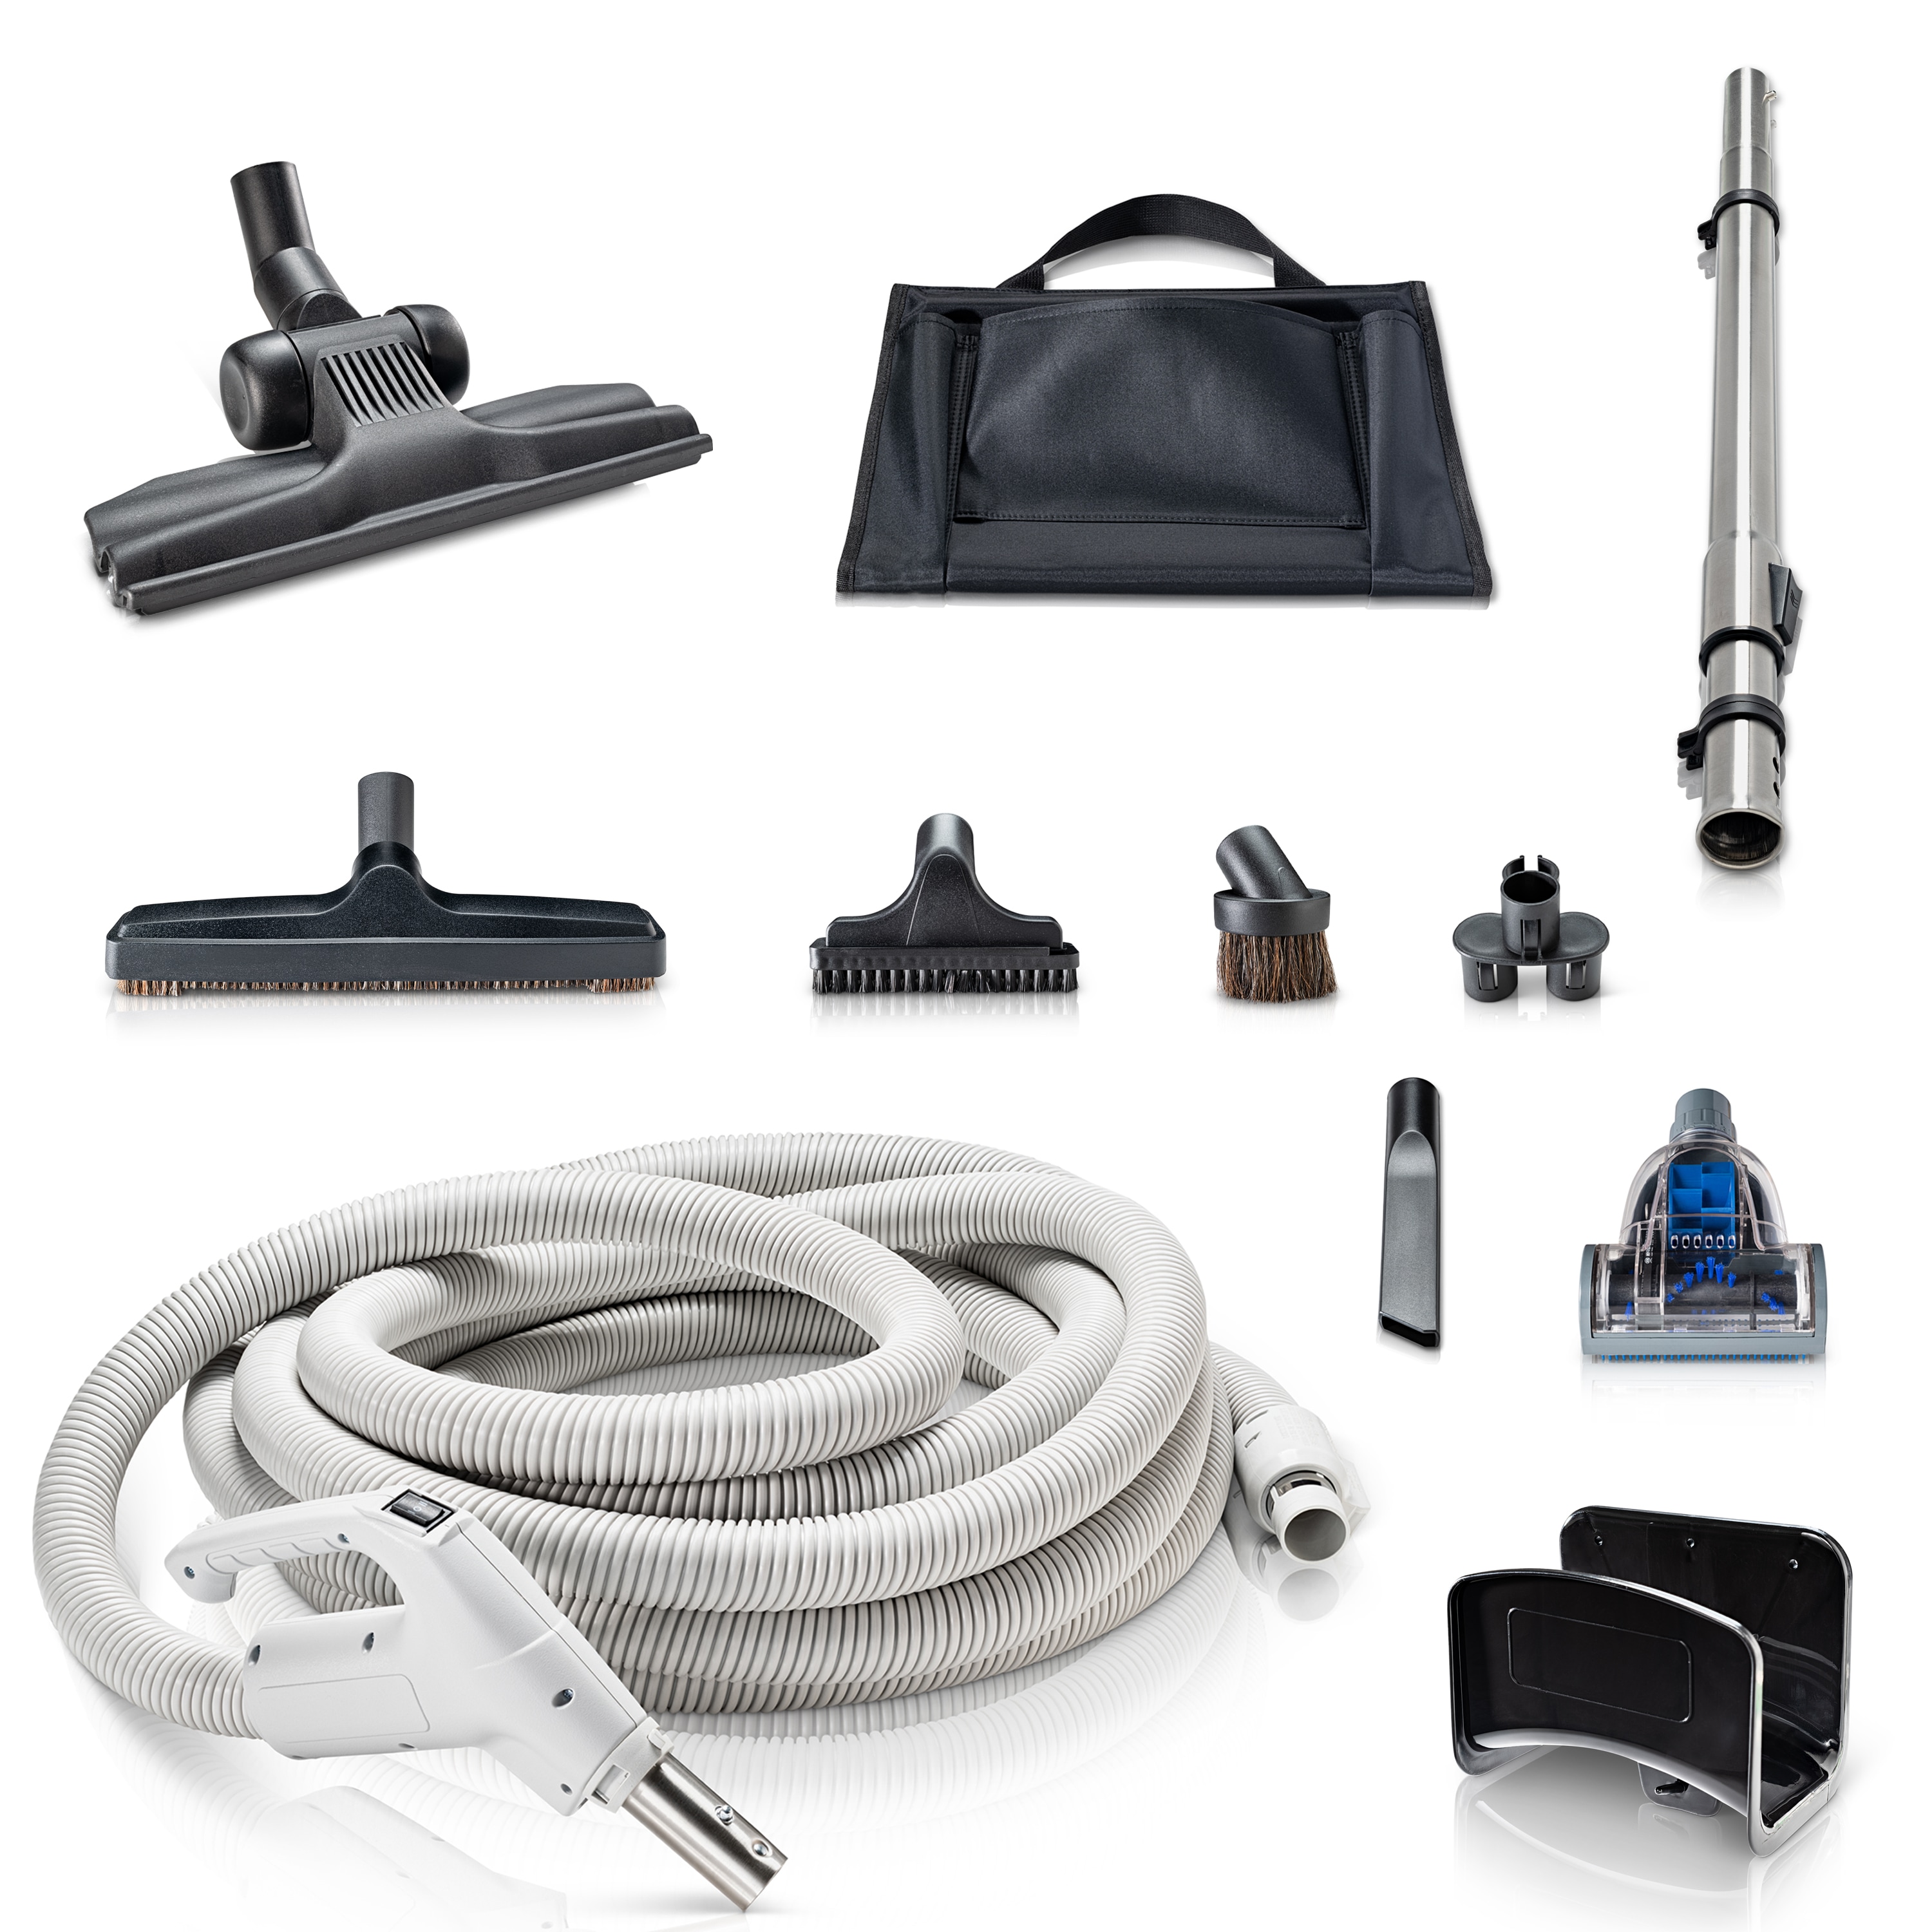 Cana-Vac Dirt Sensor Electric Package Central Vacuum Attachment Kit - 30 Foot Vacuum Hose, Electric Powerhead, Vacuum Attachments by Vacmaster